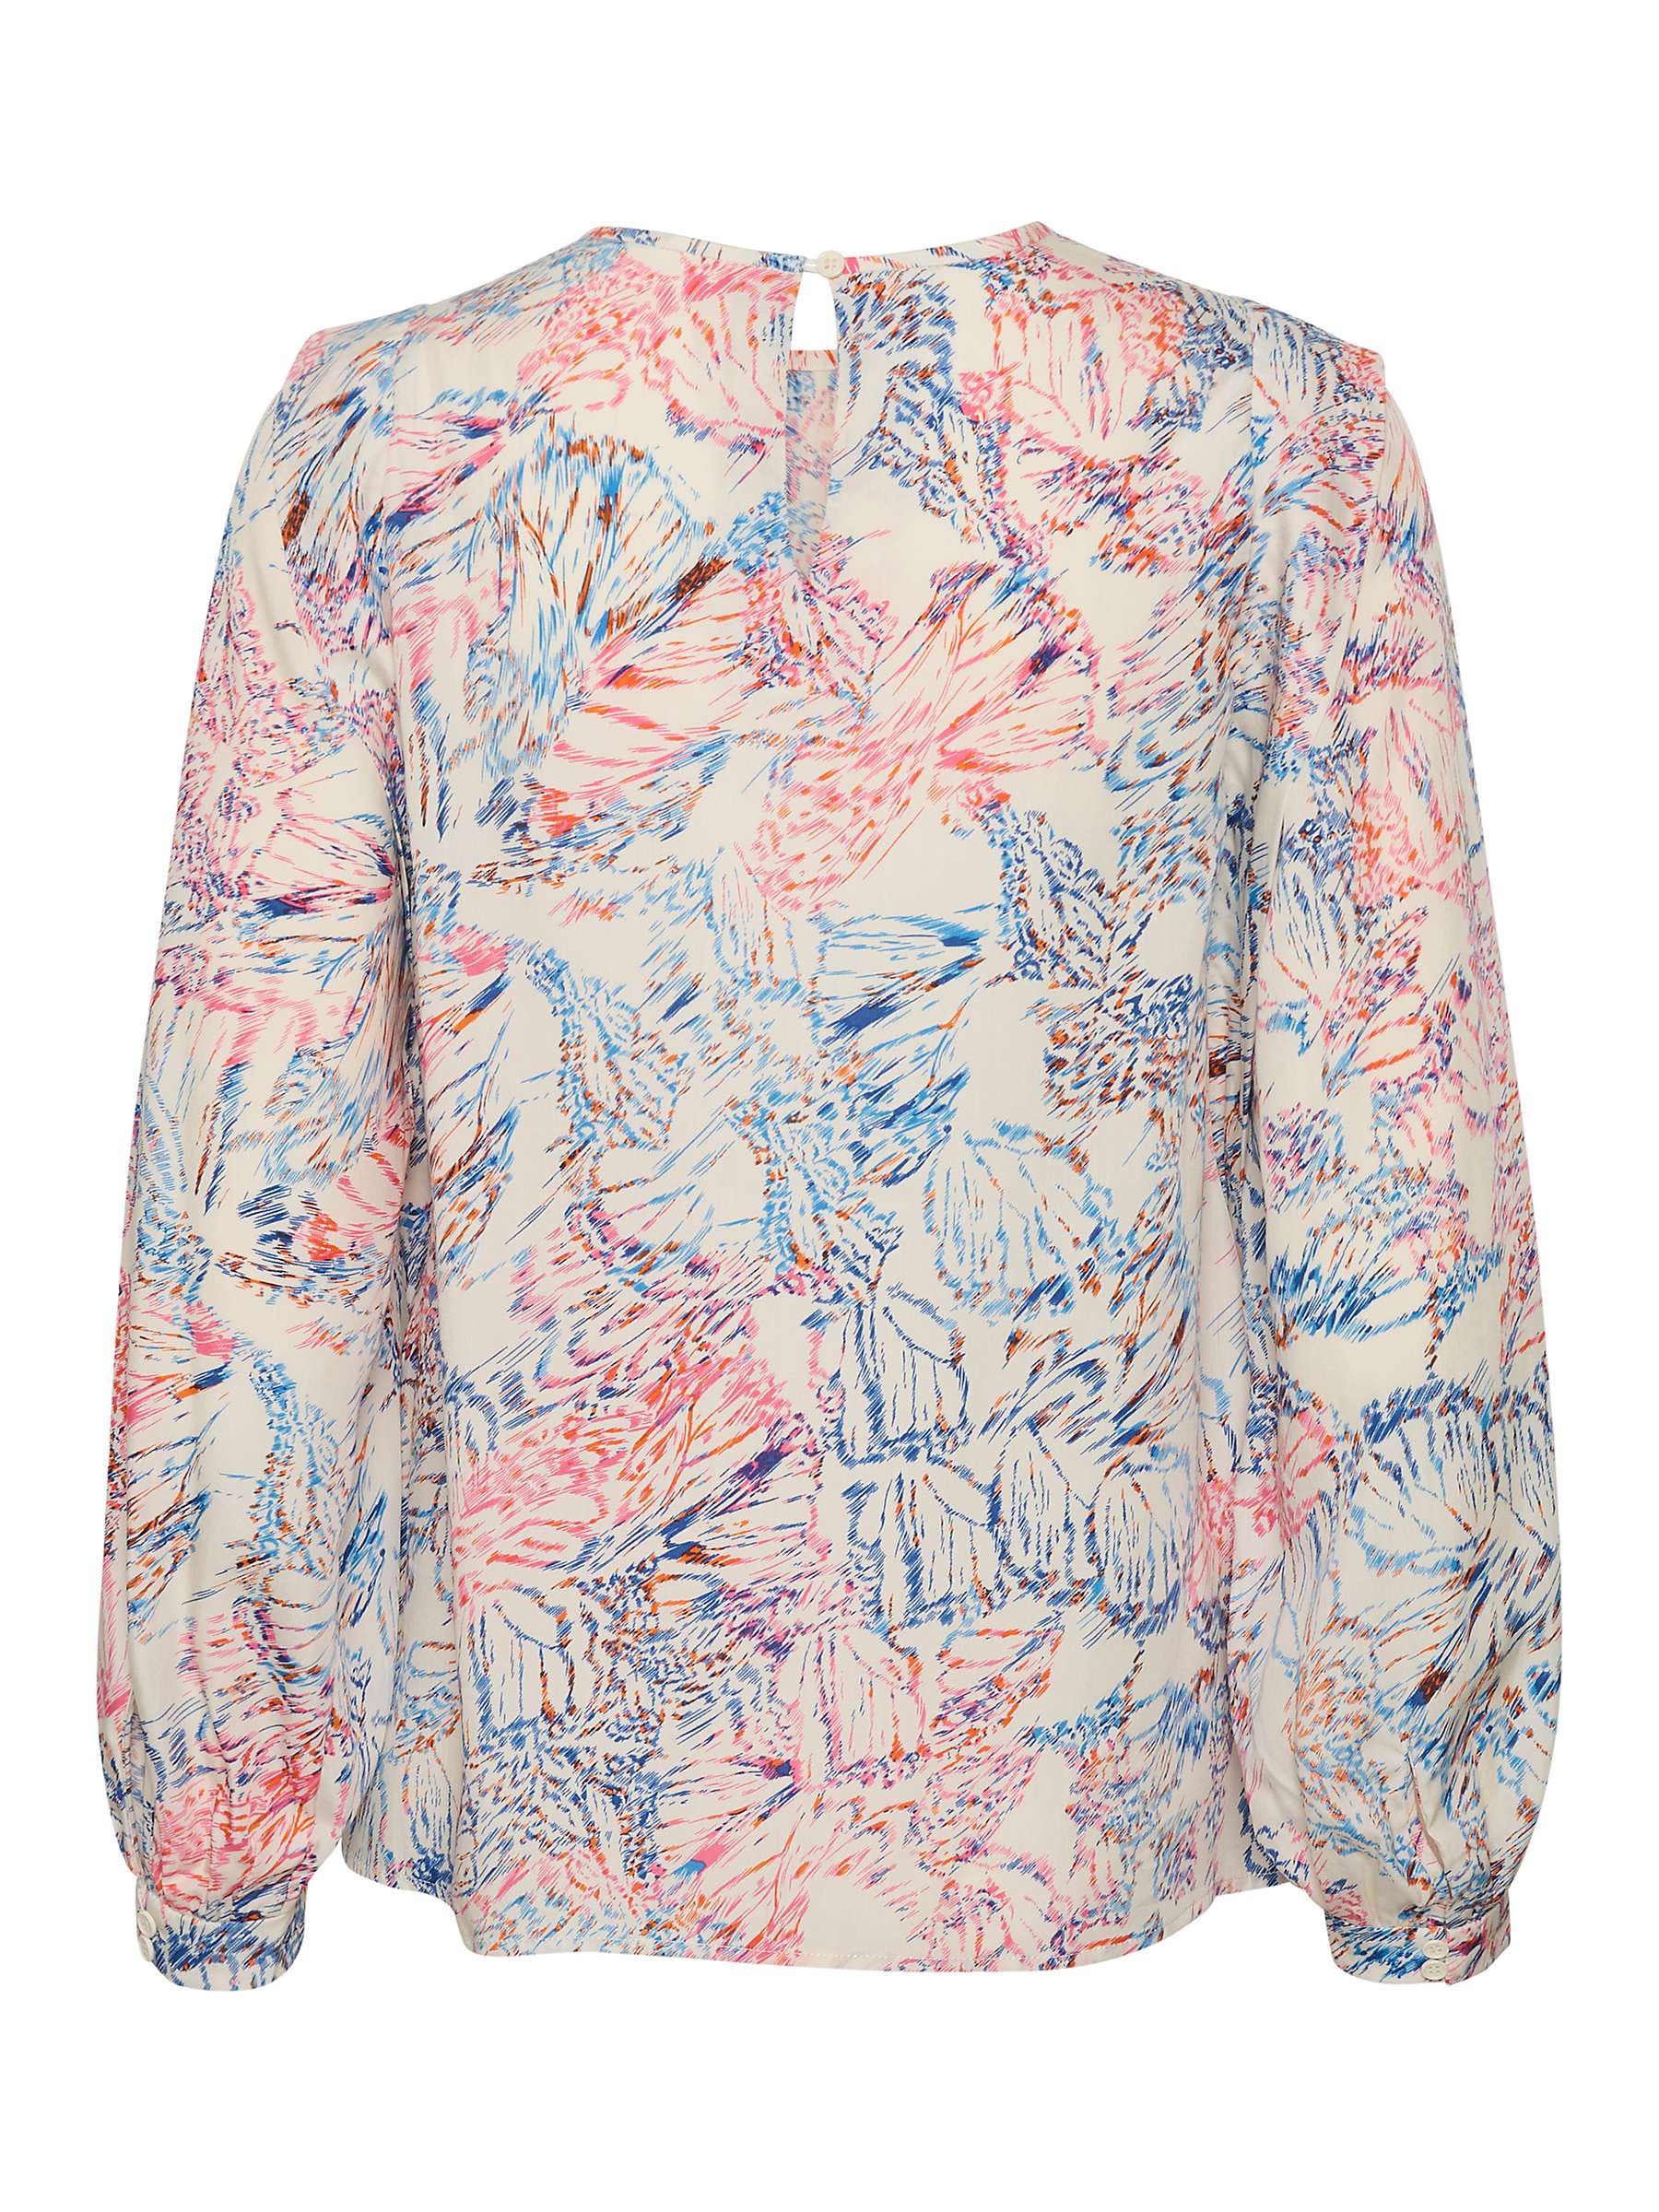 Buy InWear Damara Long Sleeve Blouse, Abstract Butterfly Online at johnlewis.com